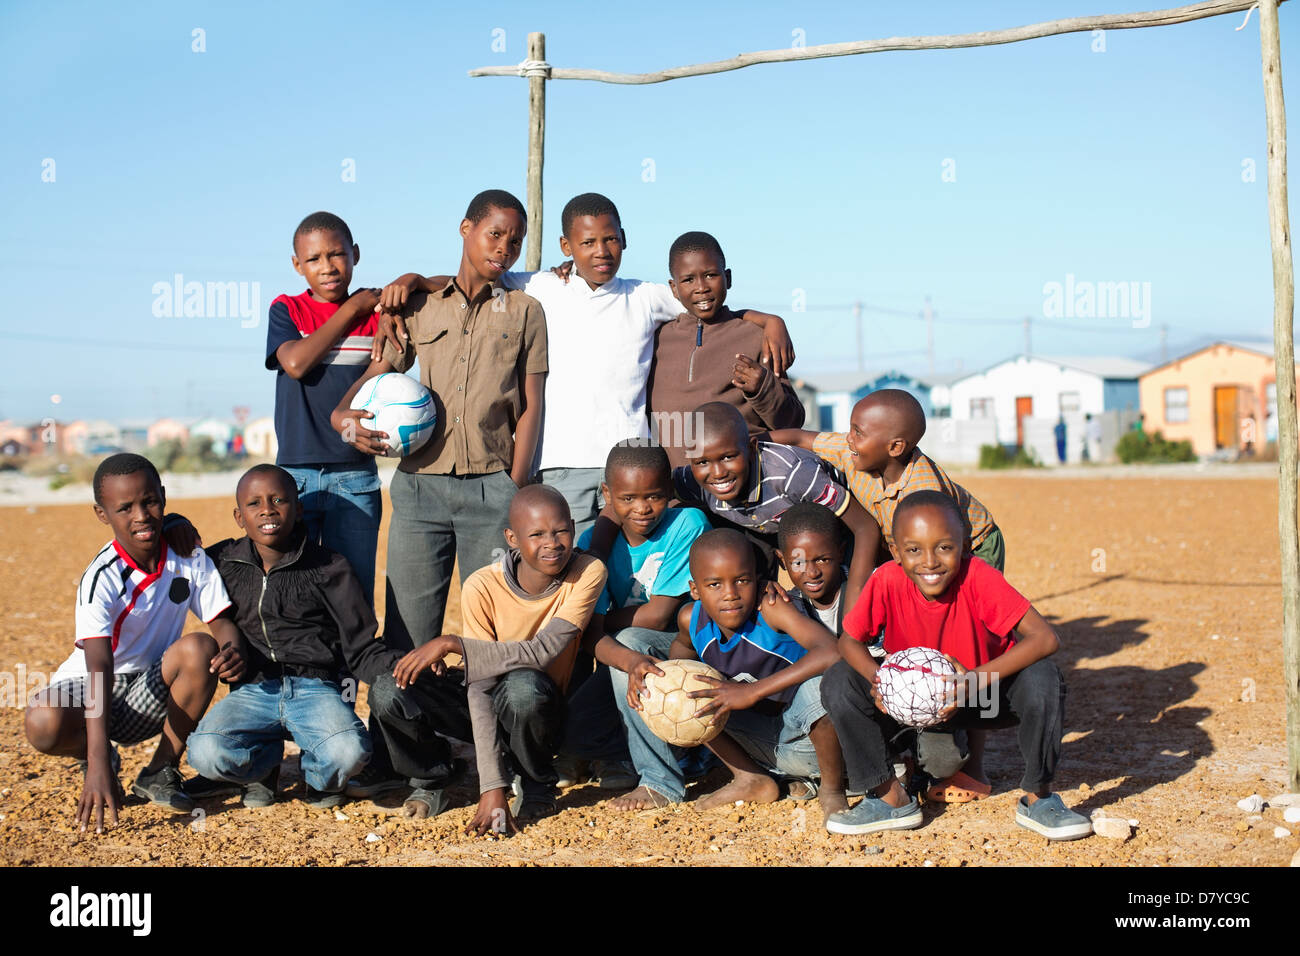 Boys holding soccer balls in dirt field Banque D'Images